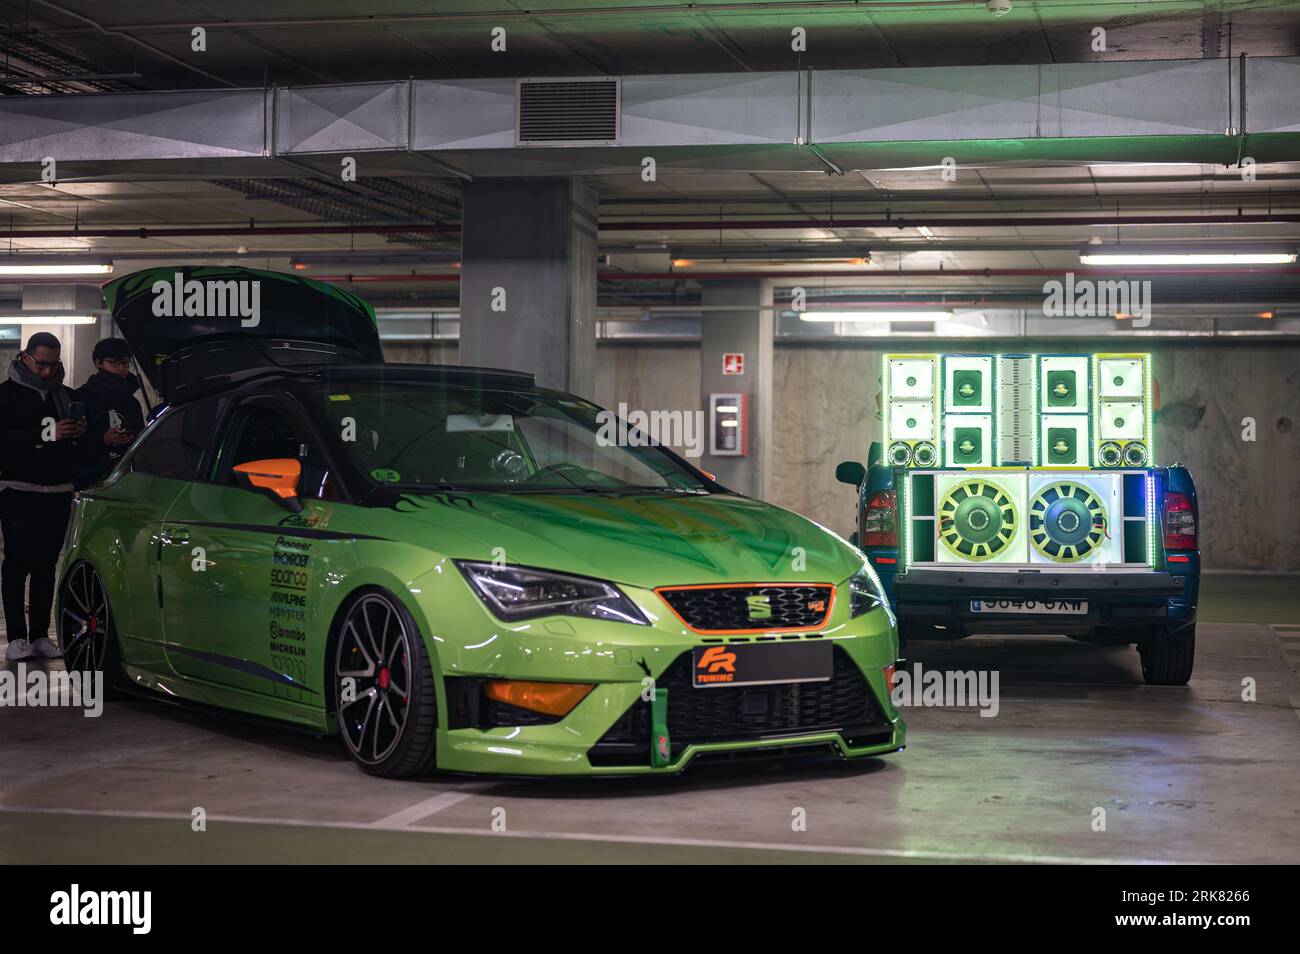 https://c8.alamy.com/comp/2RK8266/front-view-of-a-third-generation-green-seat-leon-at-a-tuning-car-rally-2RK8266.jpg